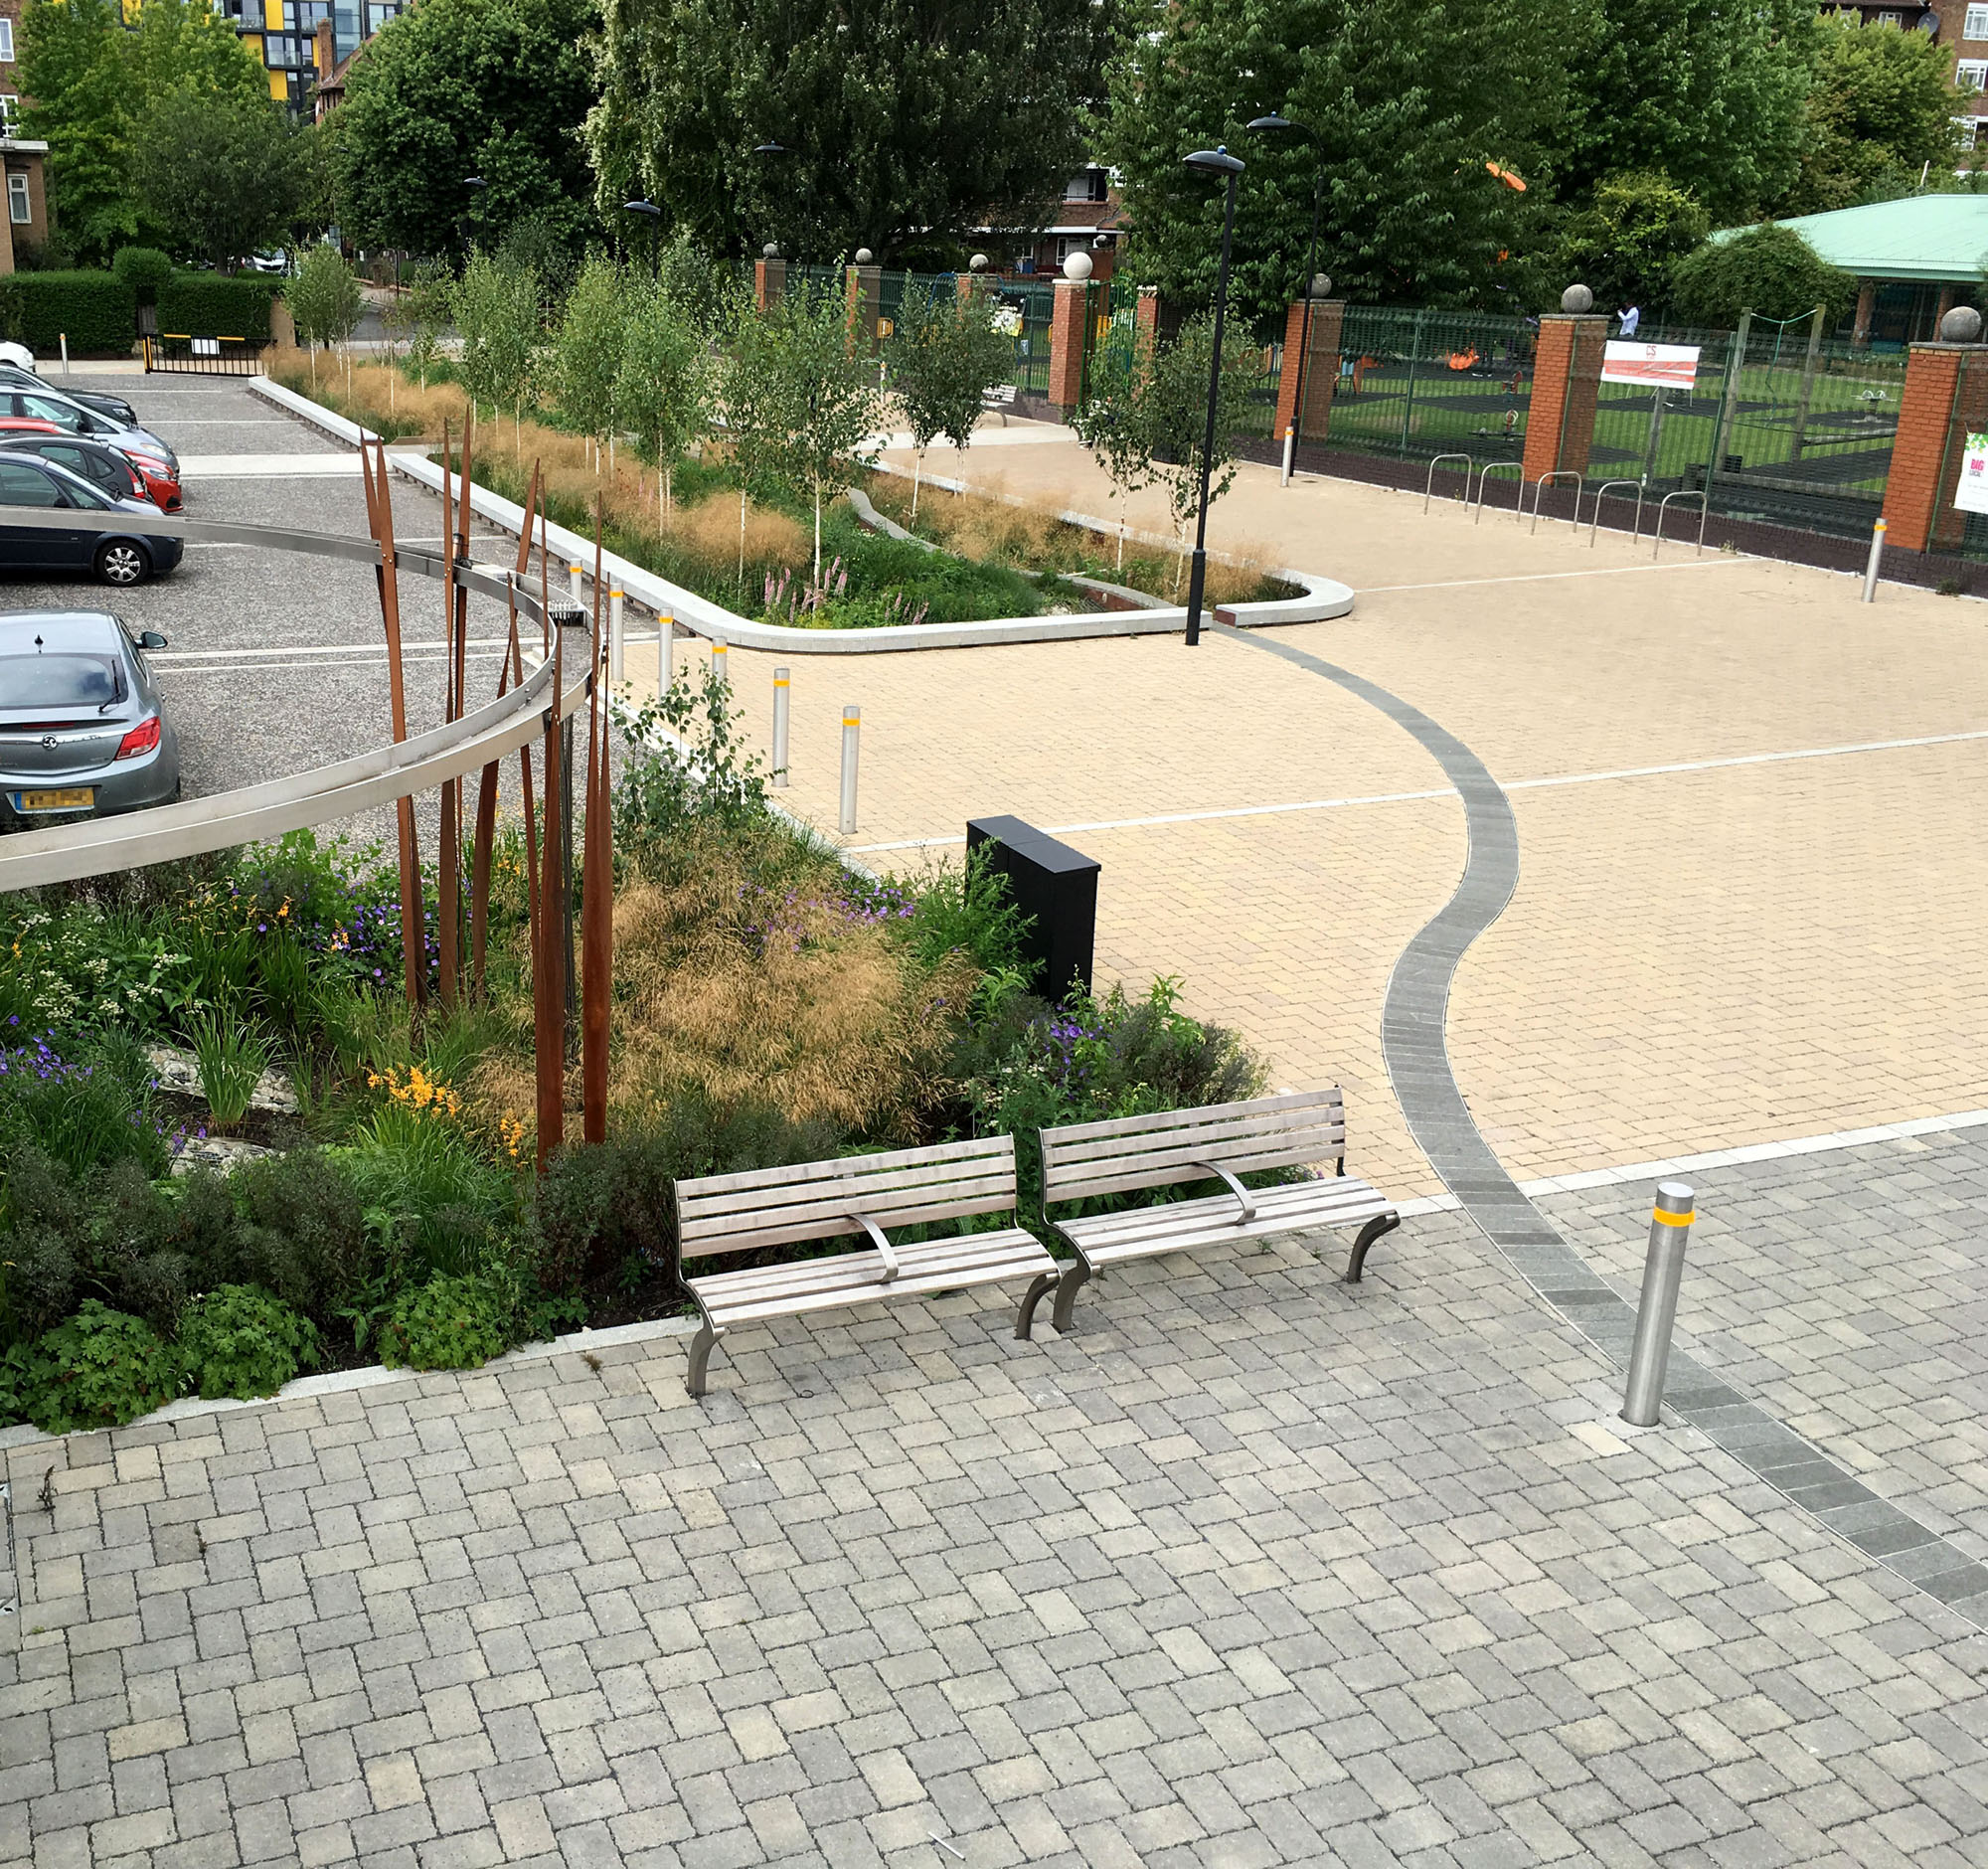 Innovative concrete block overlay paving collects, conveys and cleans rainwater for tree-planted basins at Bridget Joyce Square, London.